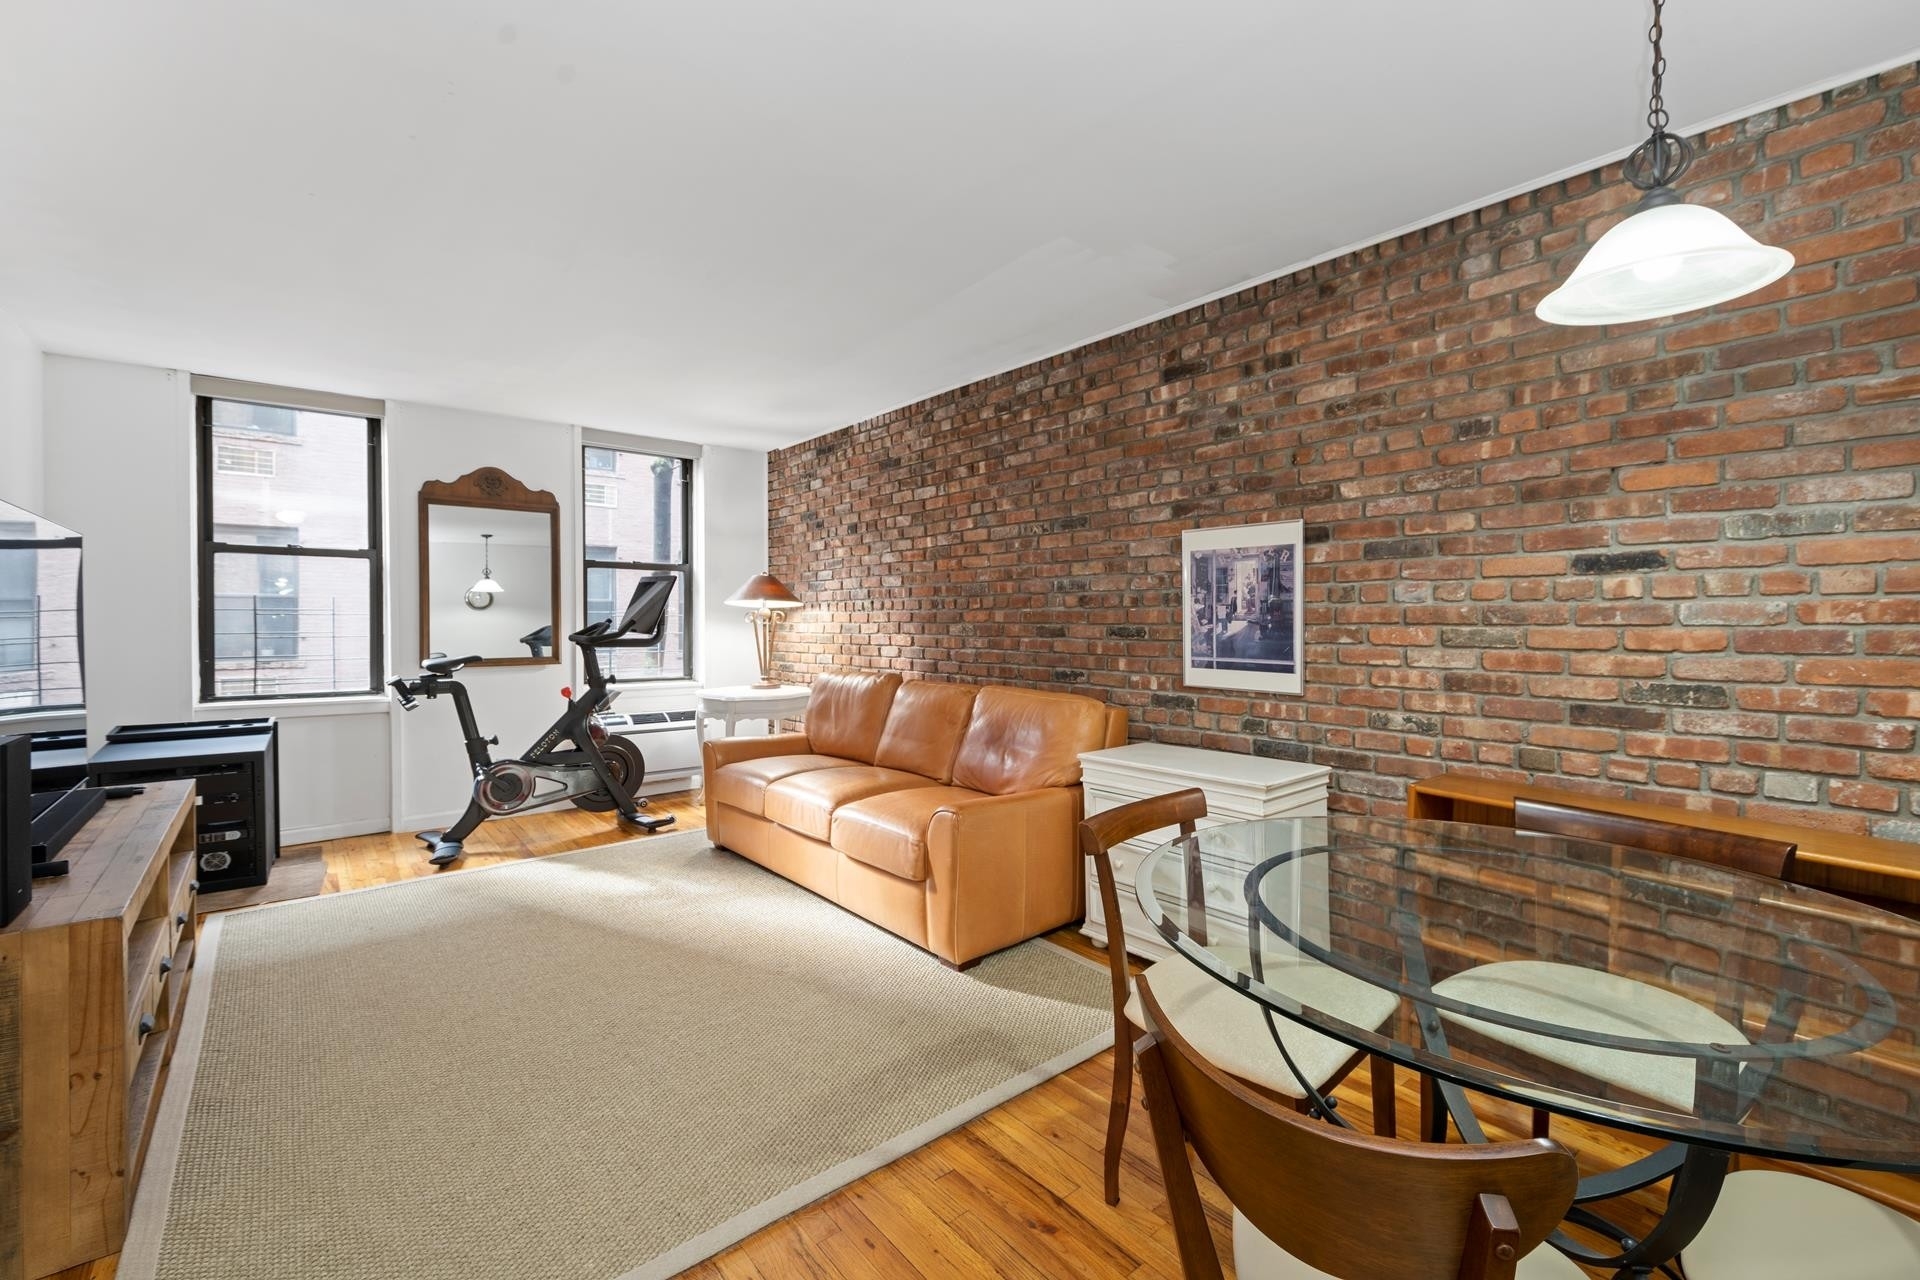 Co-op Properties for Sale at 430 E. 77 St. Assoc, 430 E 77TH ST, 3A Lenox Hill, New York, New York 10075